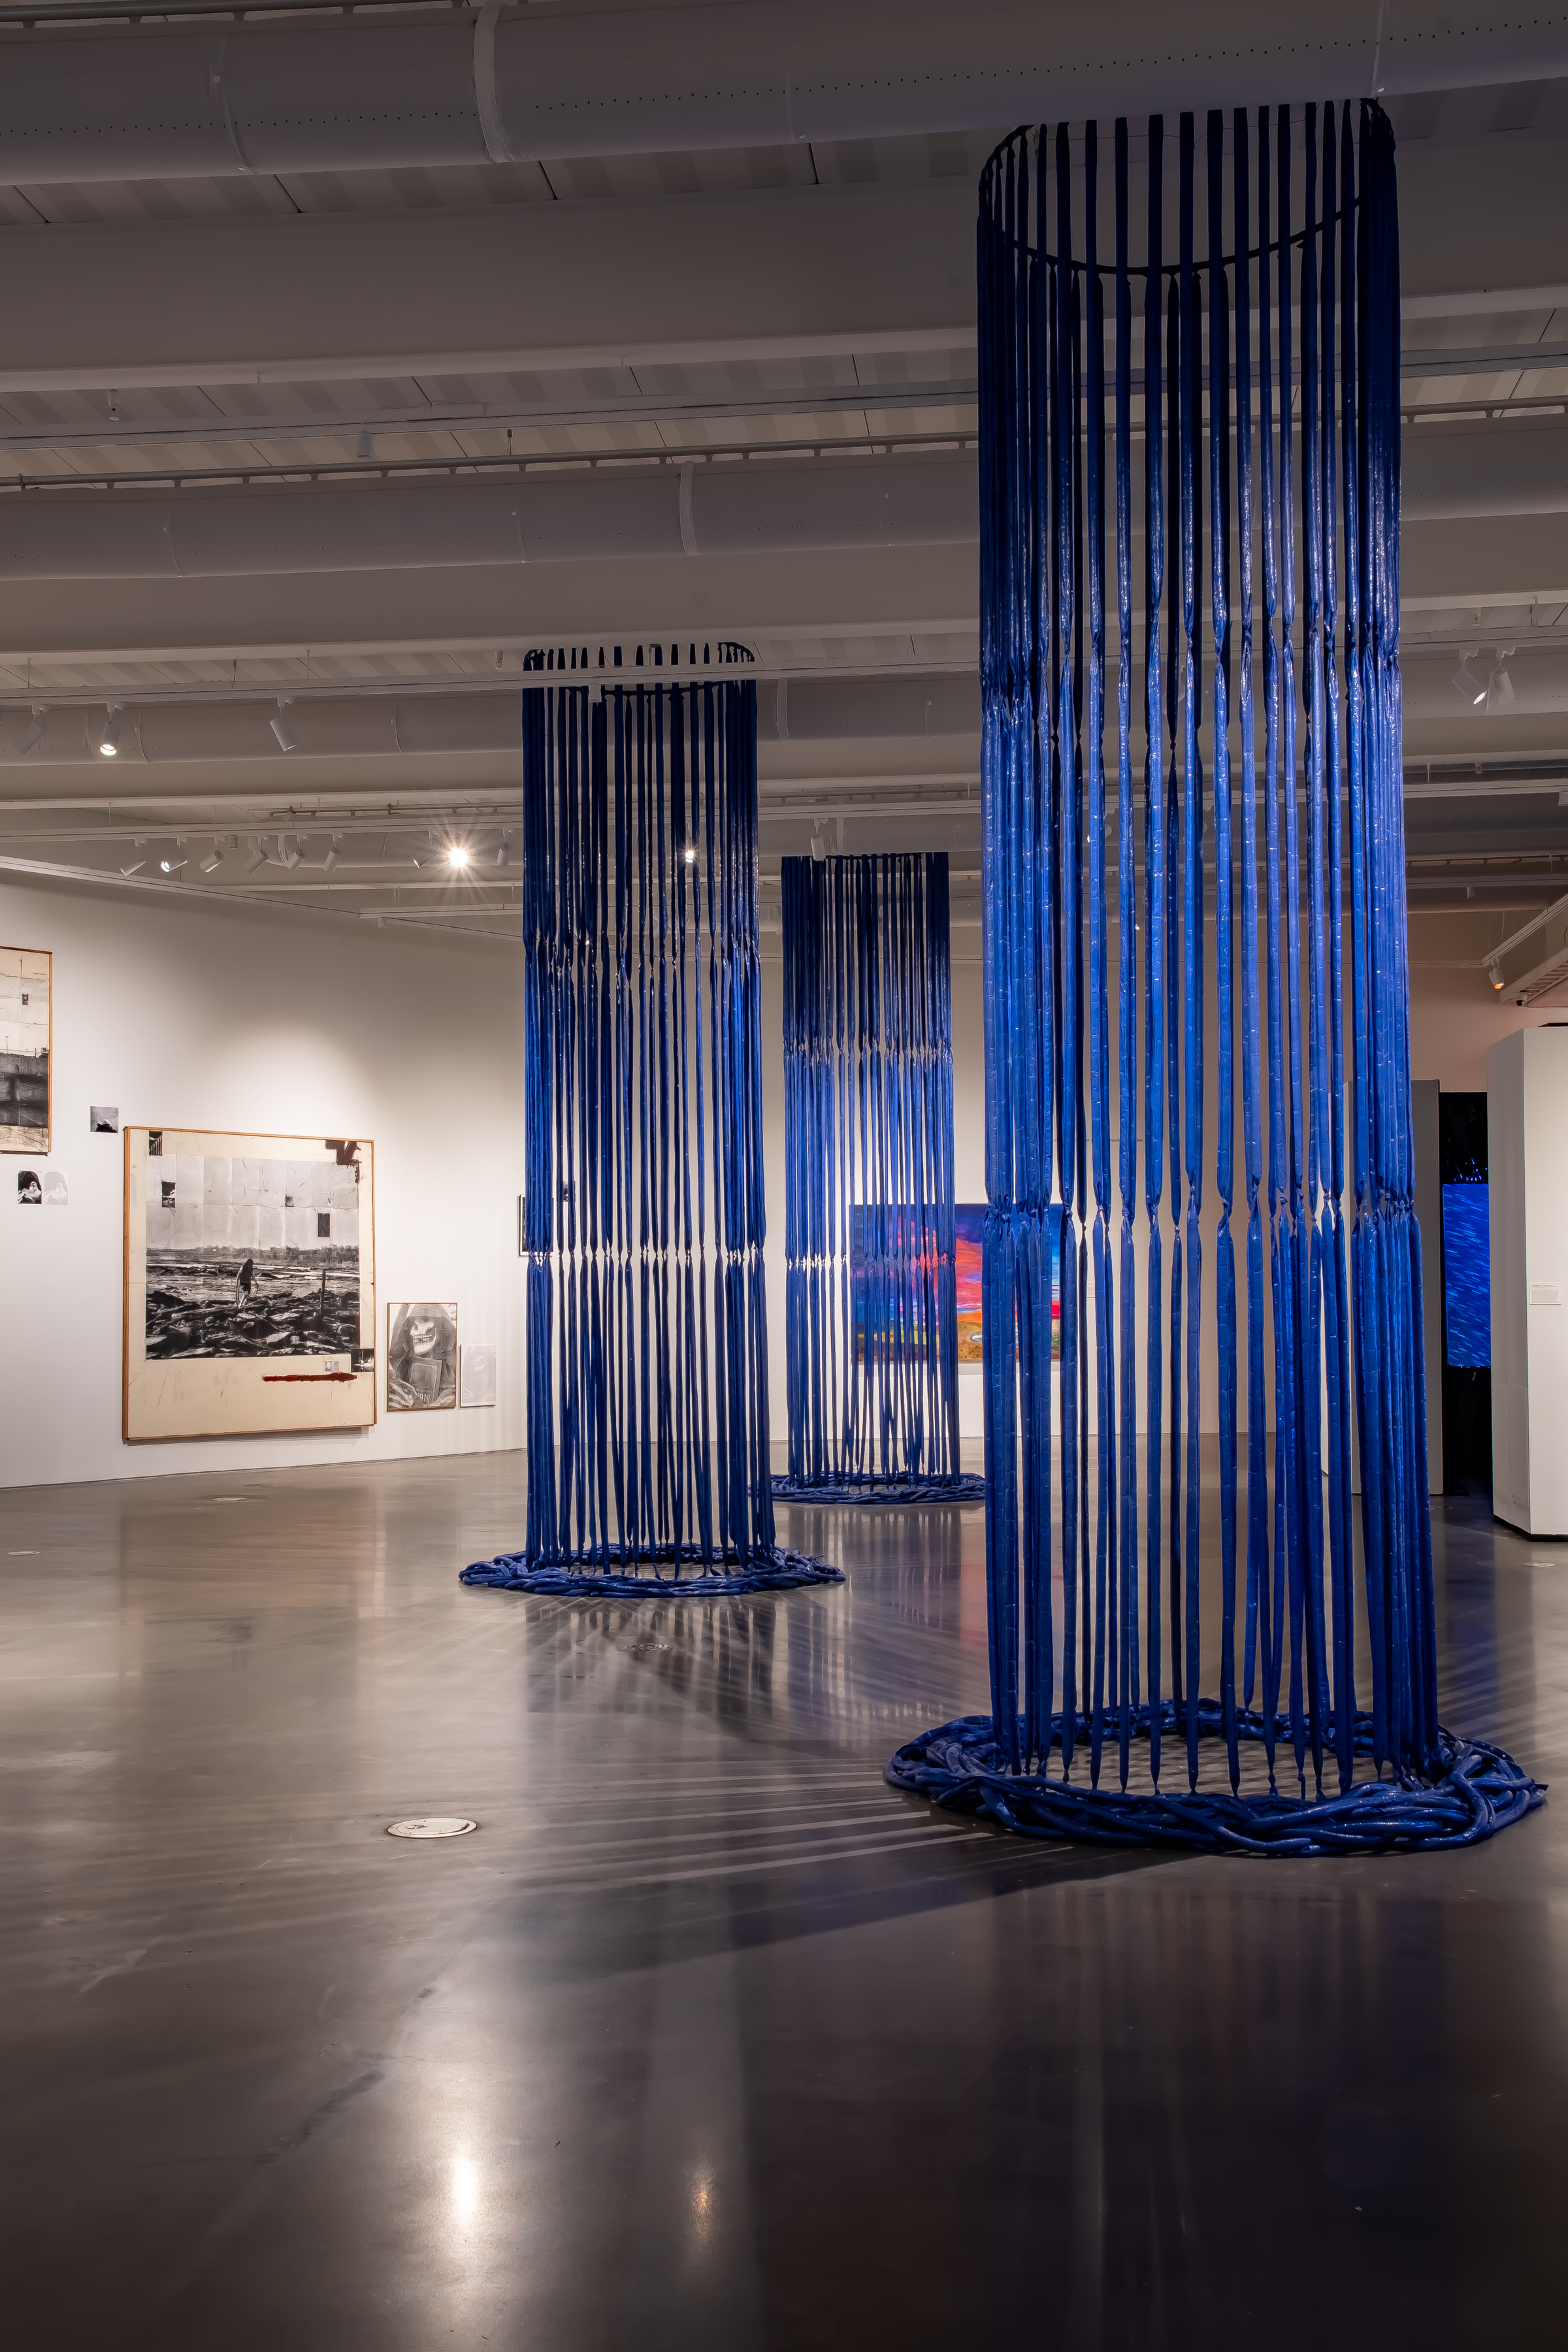 An art gallery. In the center, long flowing columns of blue tarp create cylinders. Three hang staggered behind the other. Black and white photos on a large canvas hand on the back left wall.